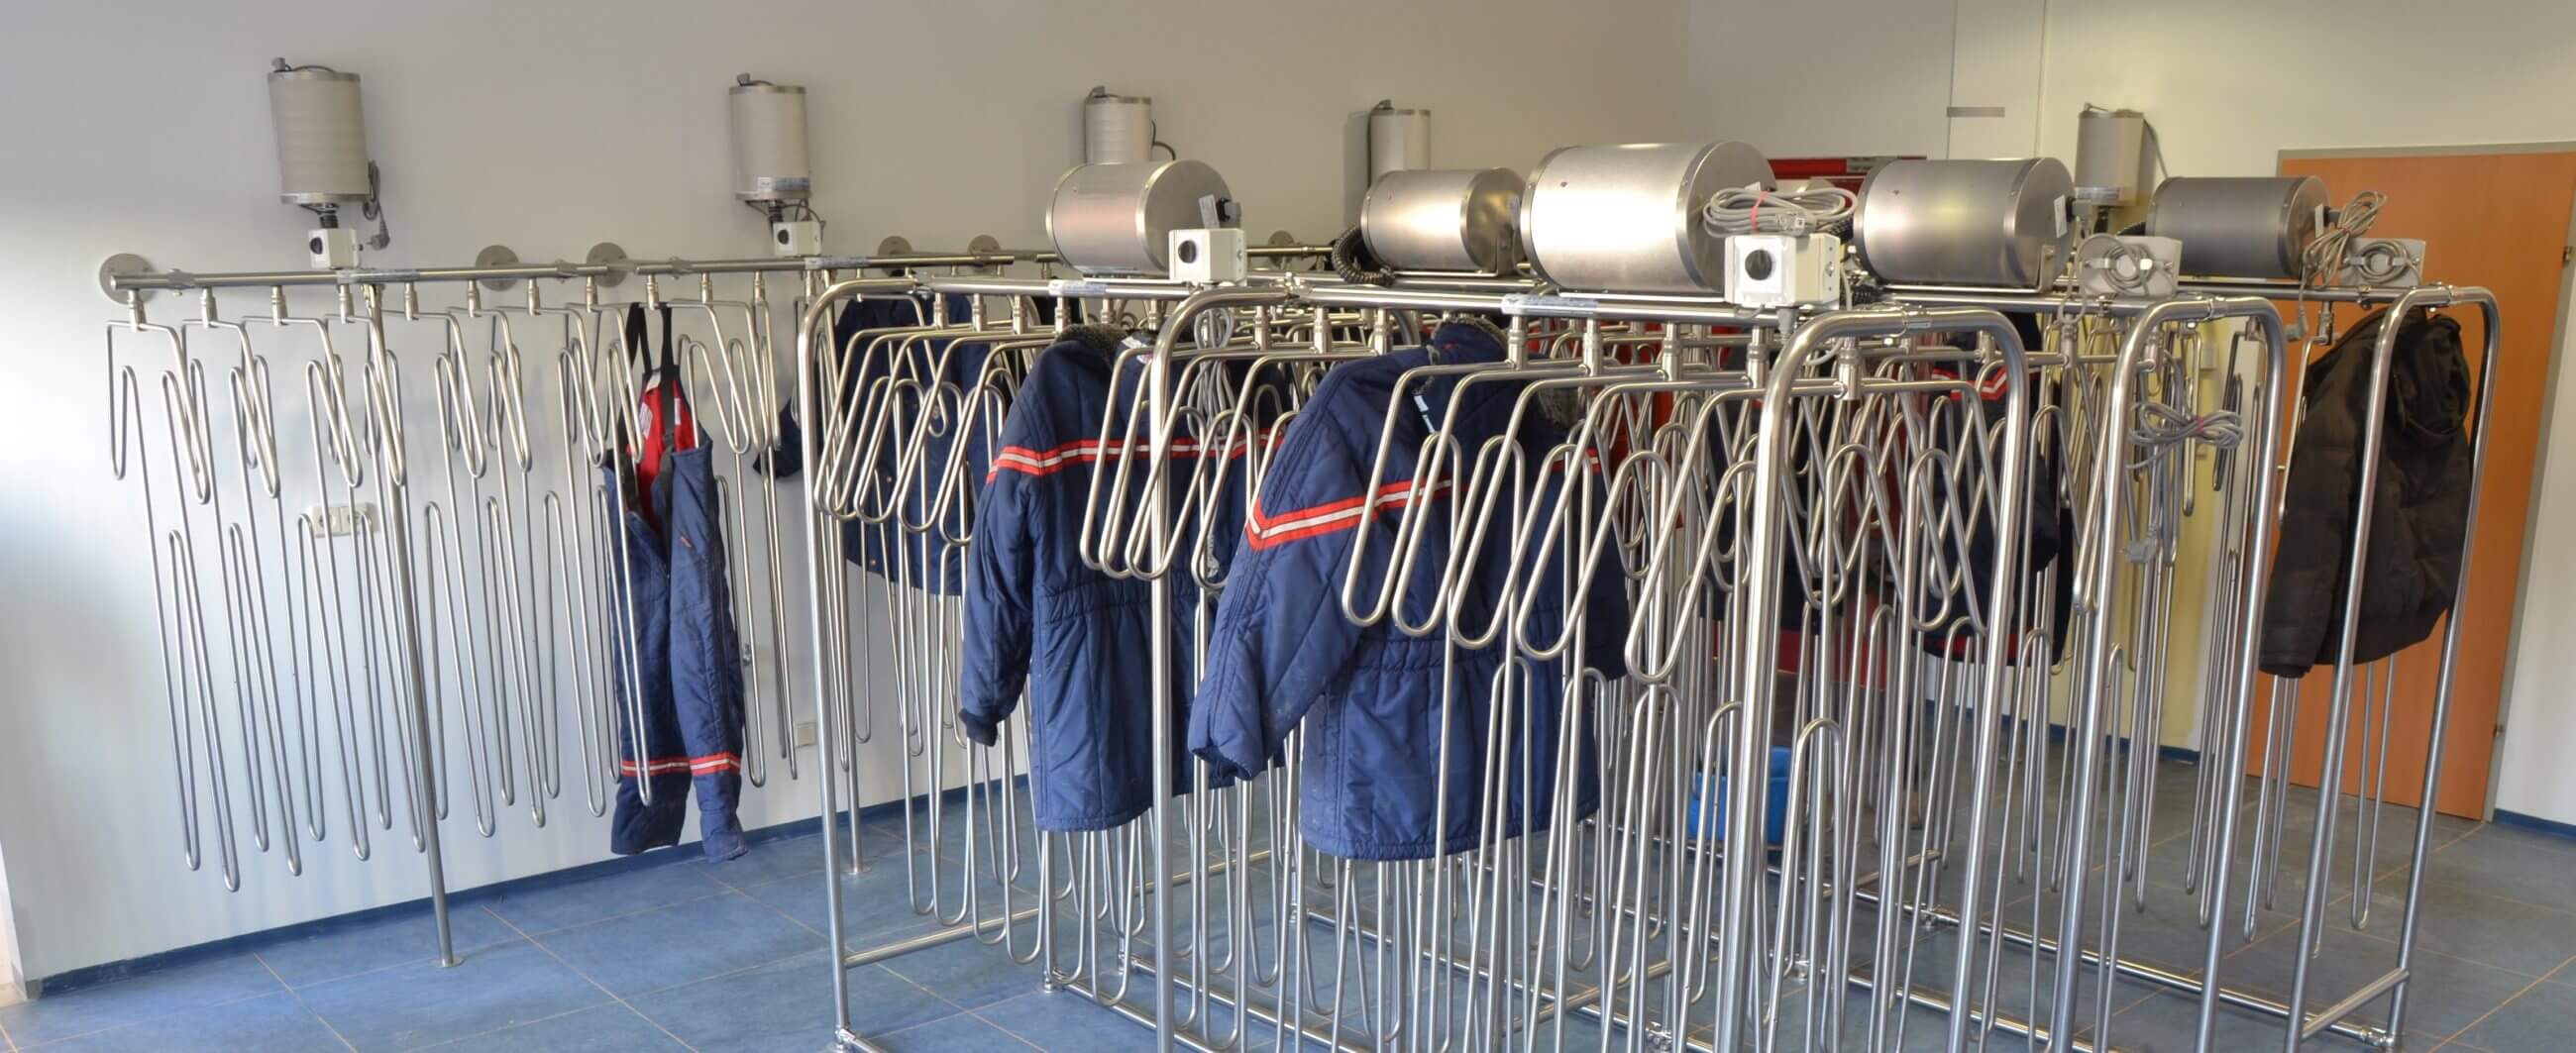 drying system for thermal clothing and splash suits in cold stores and freezer rooms